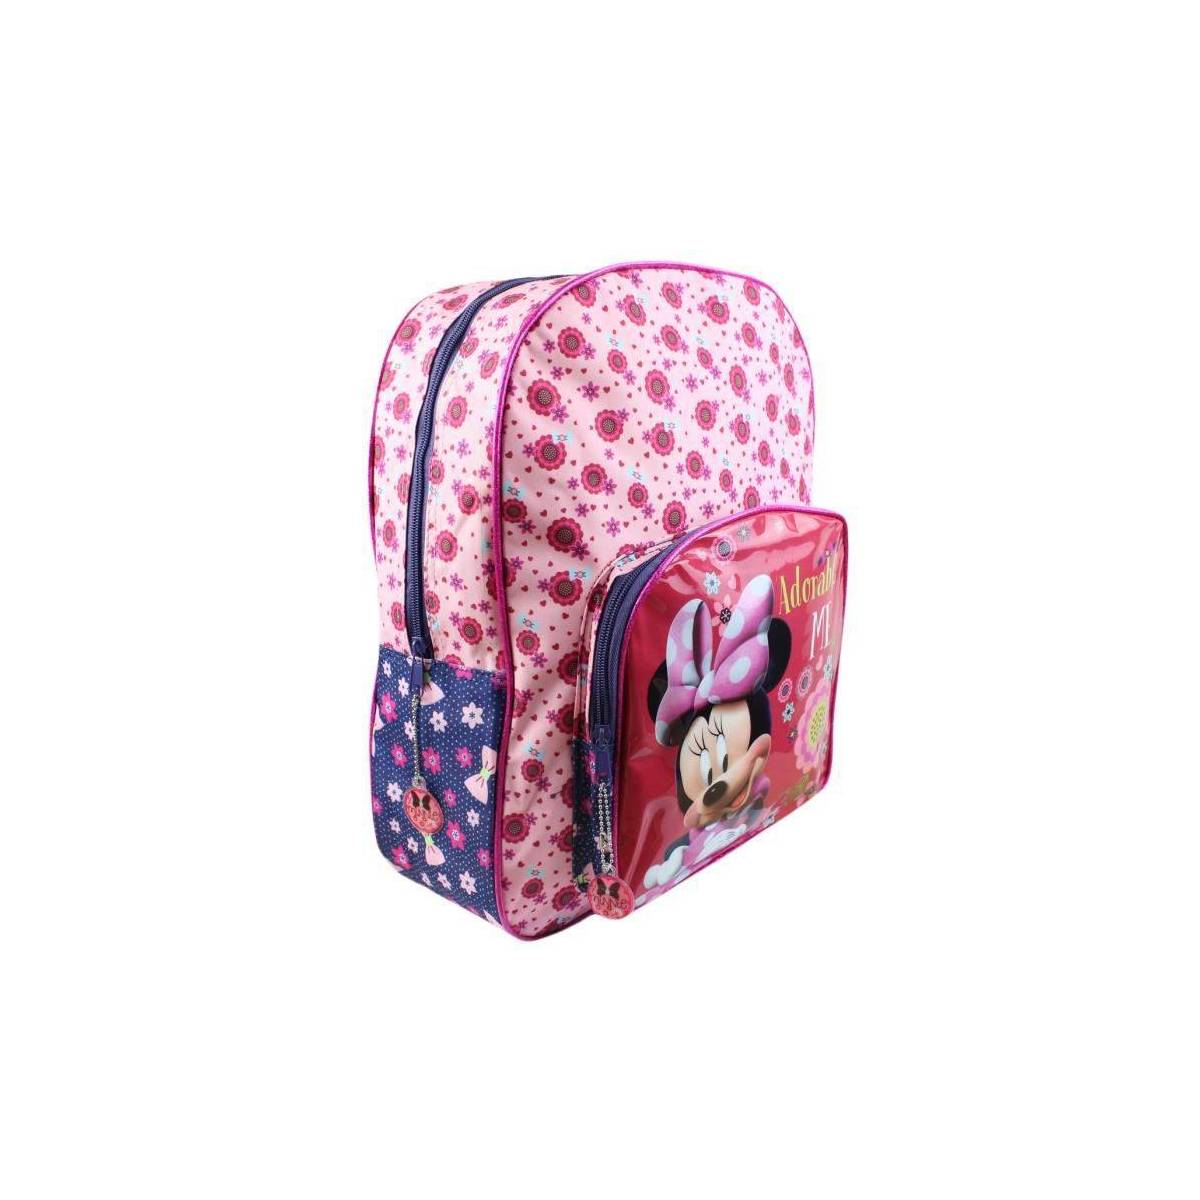 Backpack girl Minnie Adorable me 41 cm